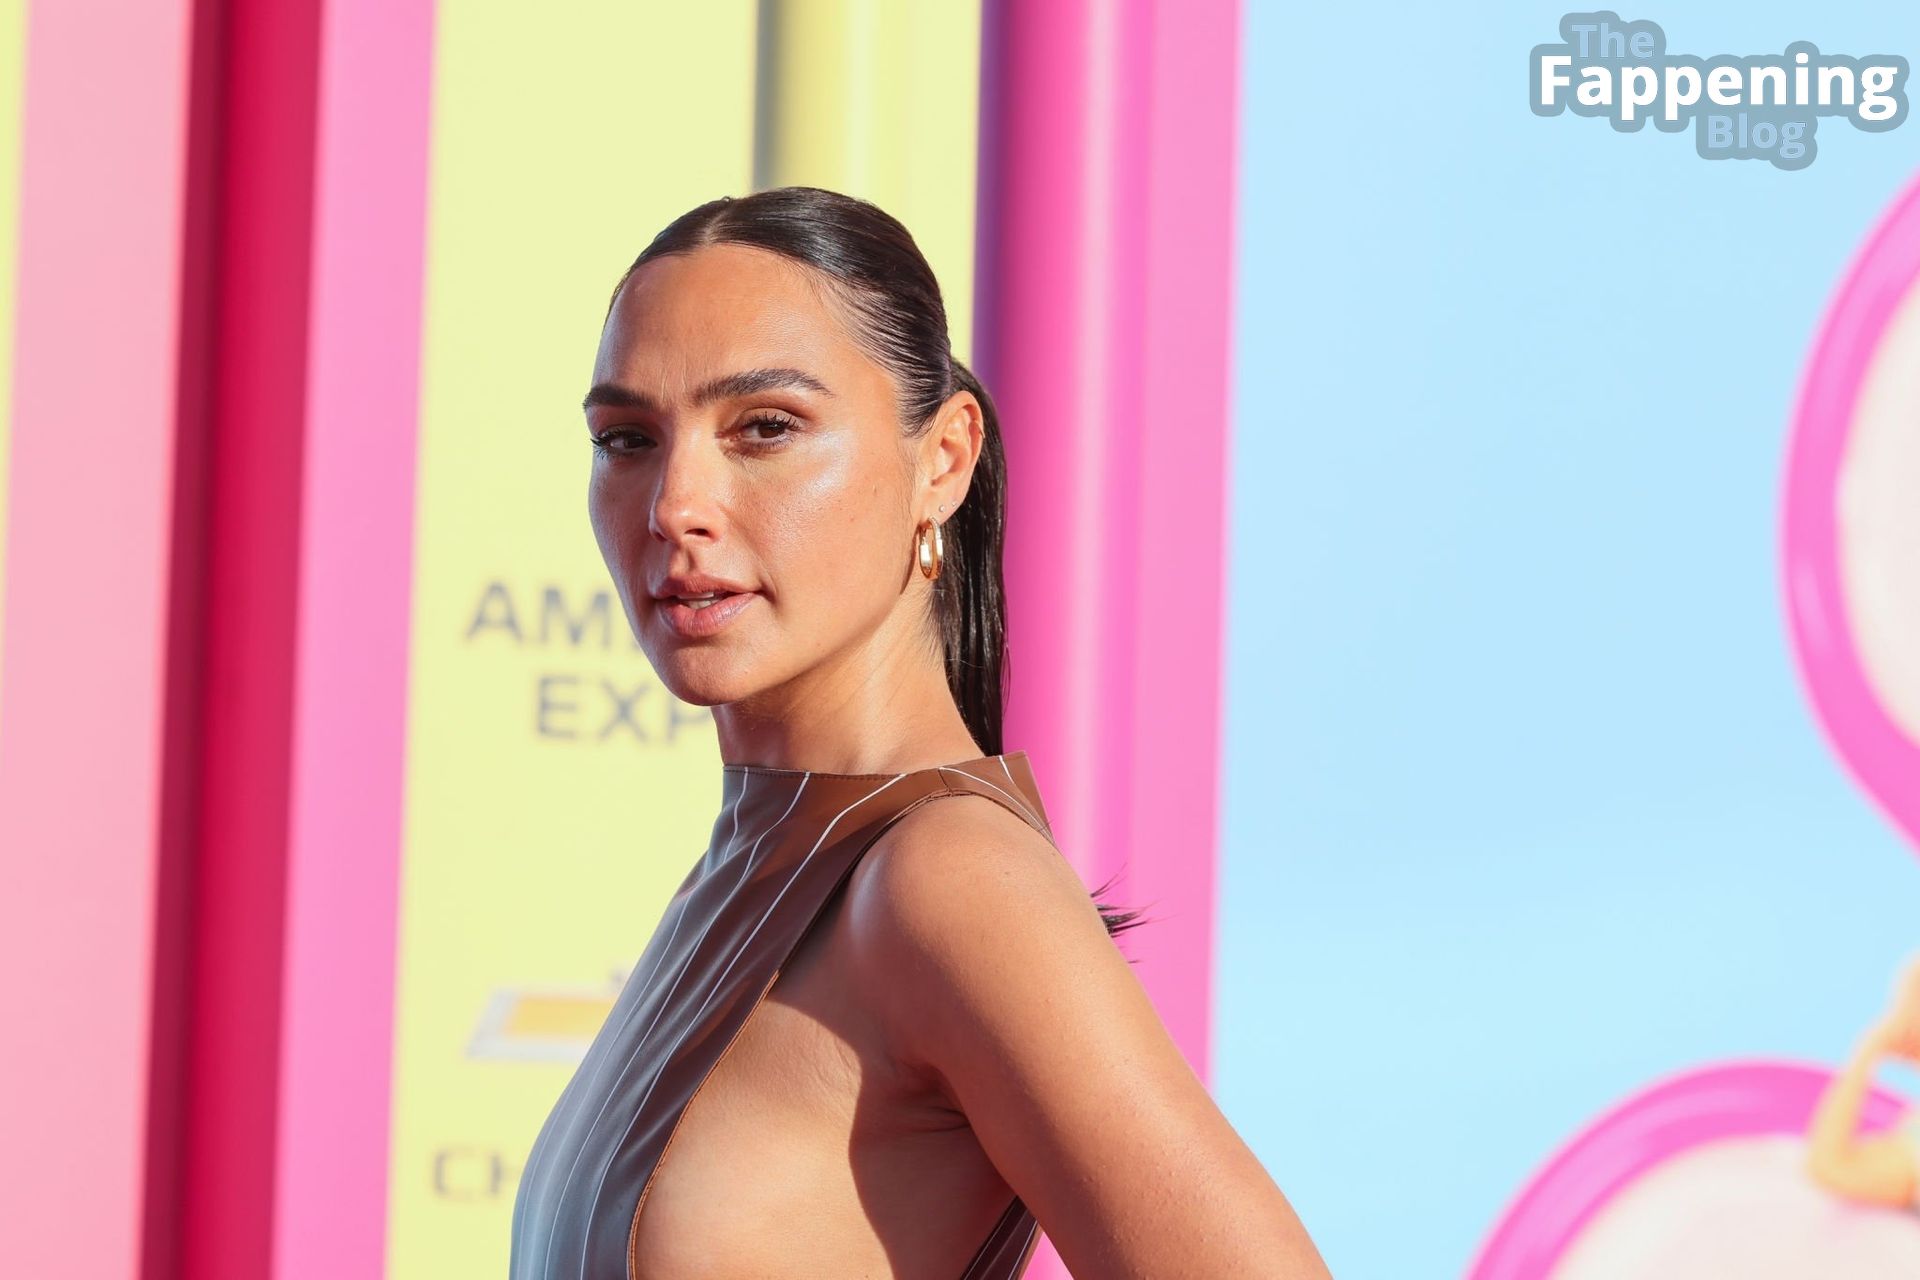 Gal Gadot Rocks a Leggy Look with Nice Sideboob at the “Barbie” Premiere in LA (92 Photos)